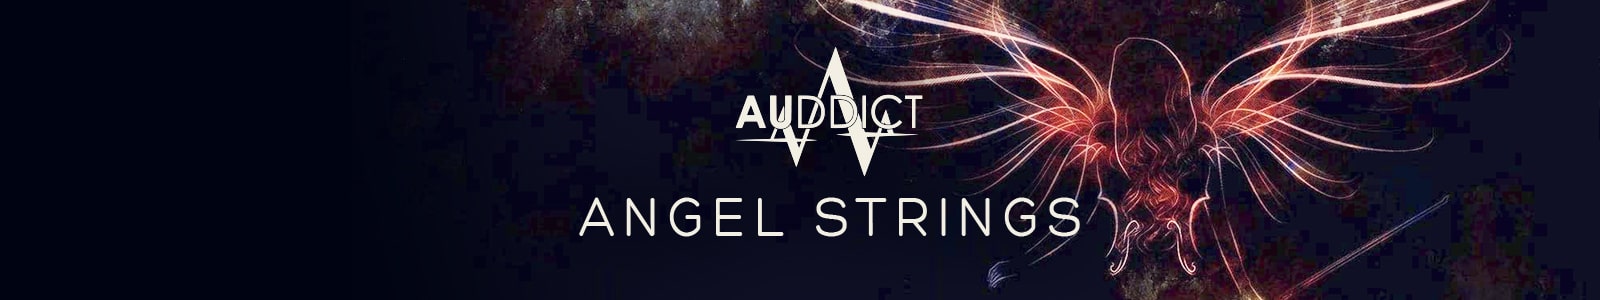 Angel Strings by Auddict